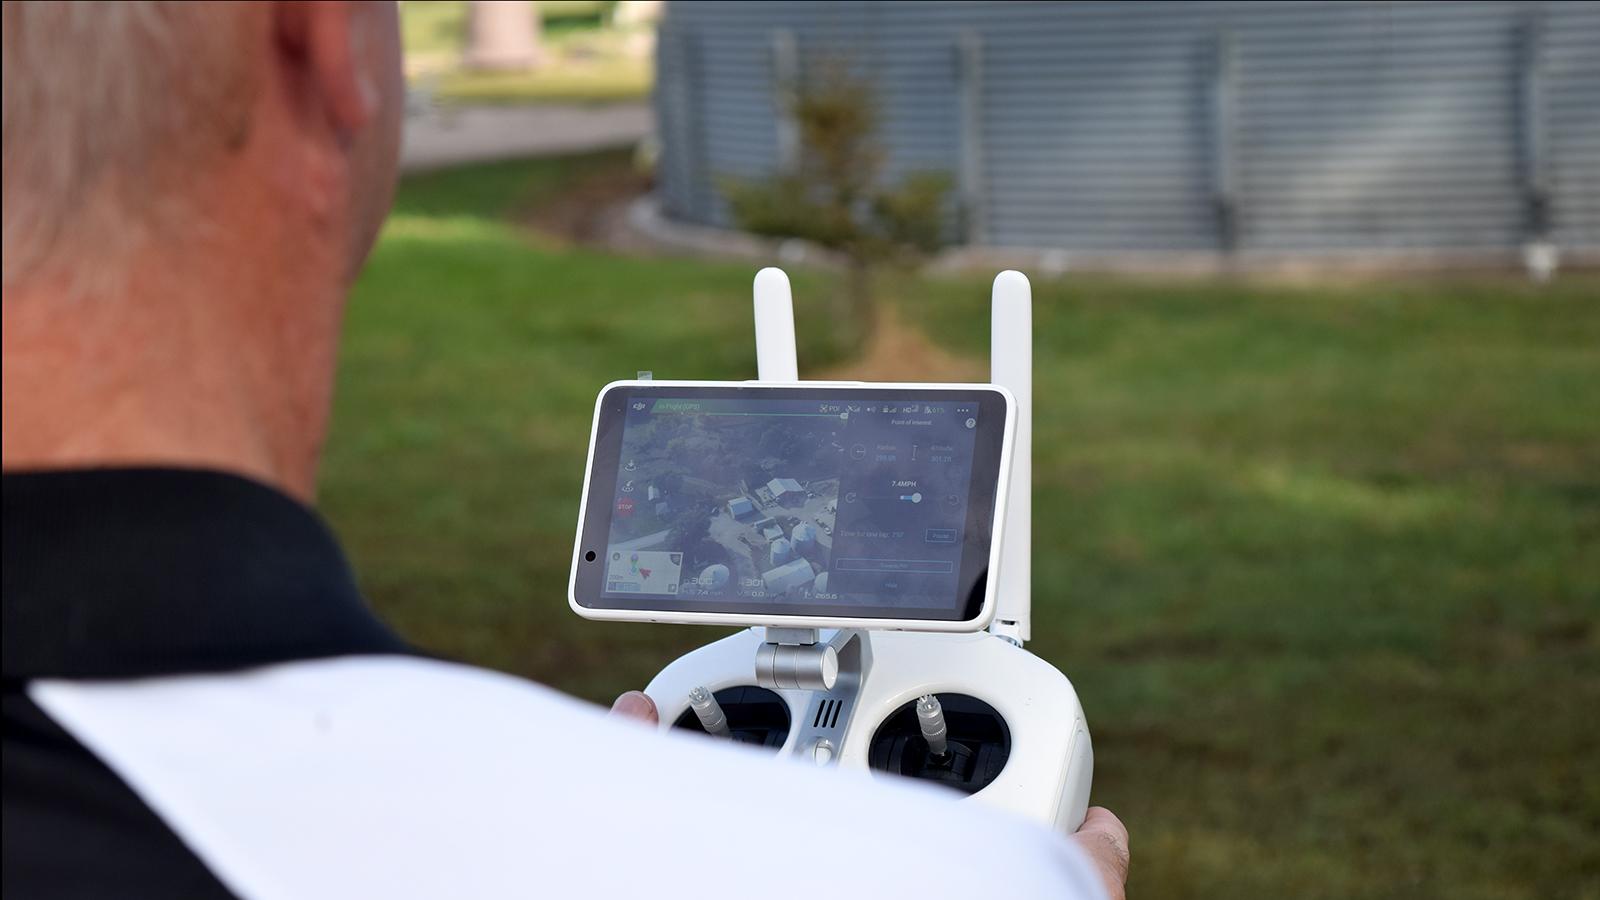 Drone operator looking at the screen of the controller while flying the drone.